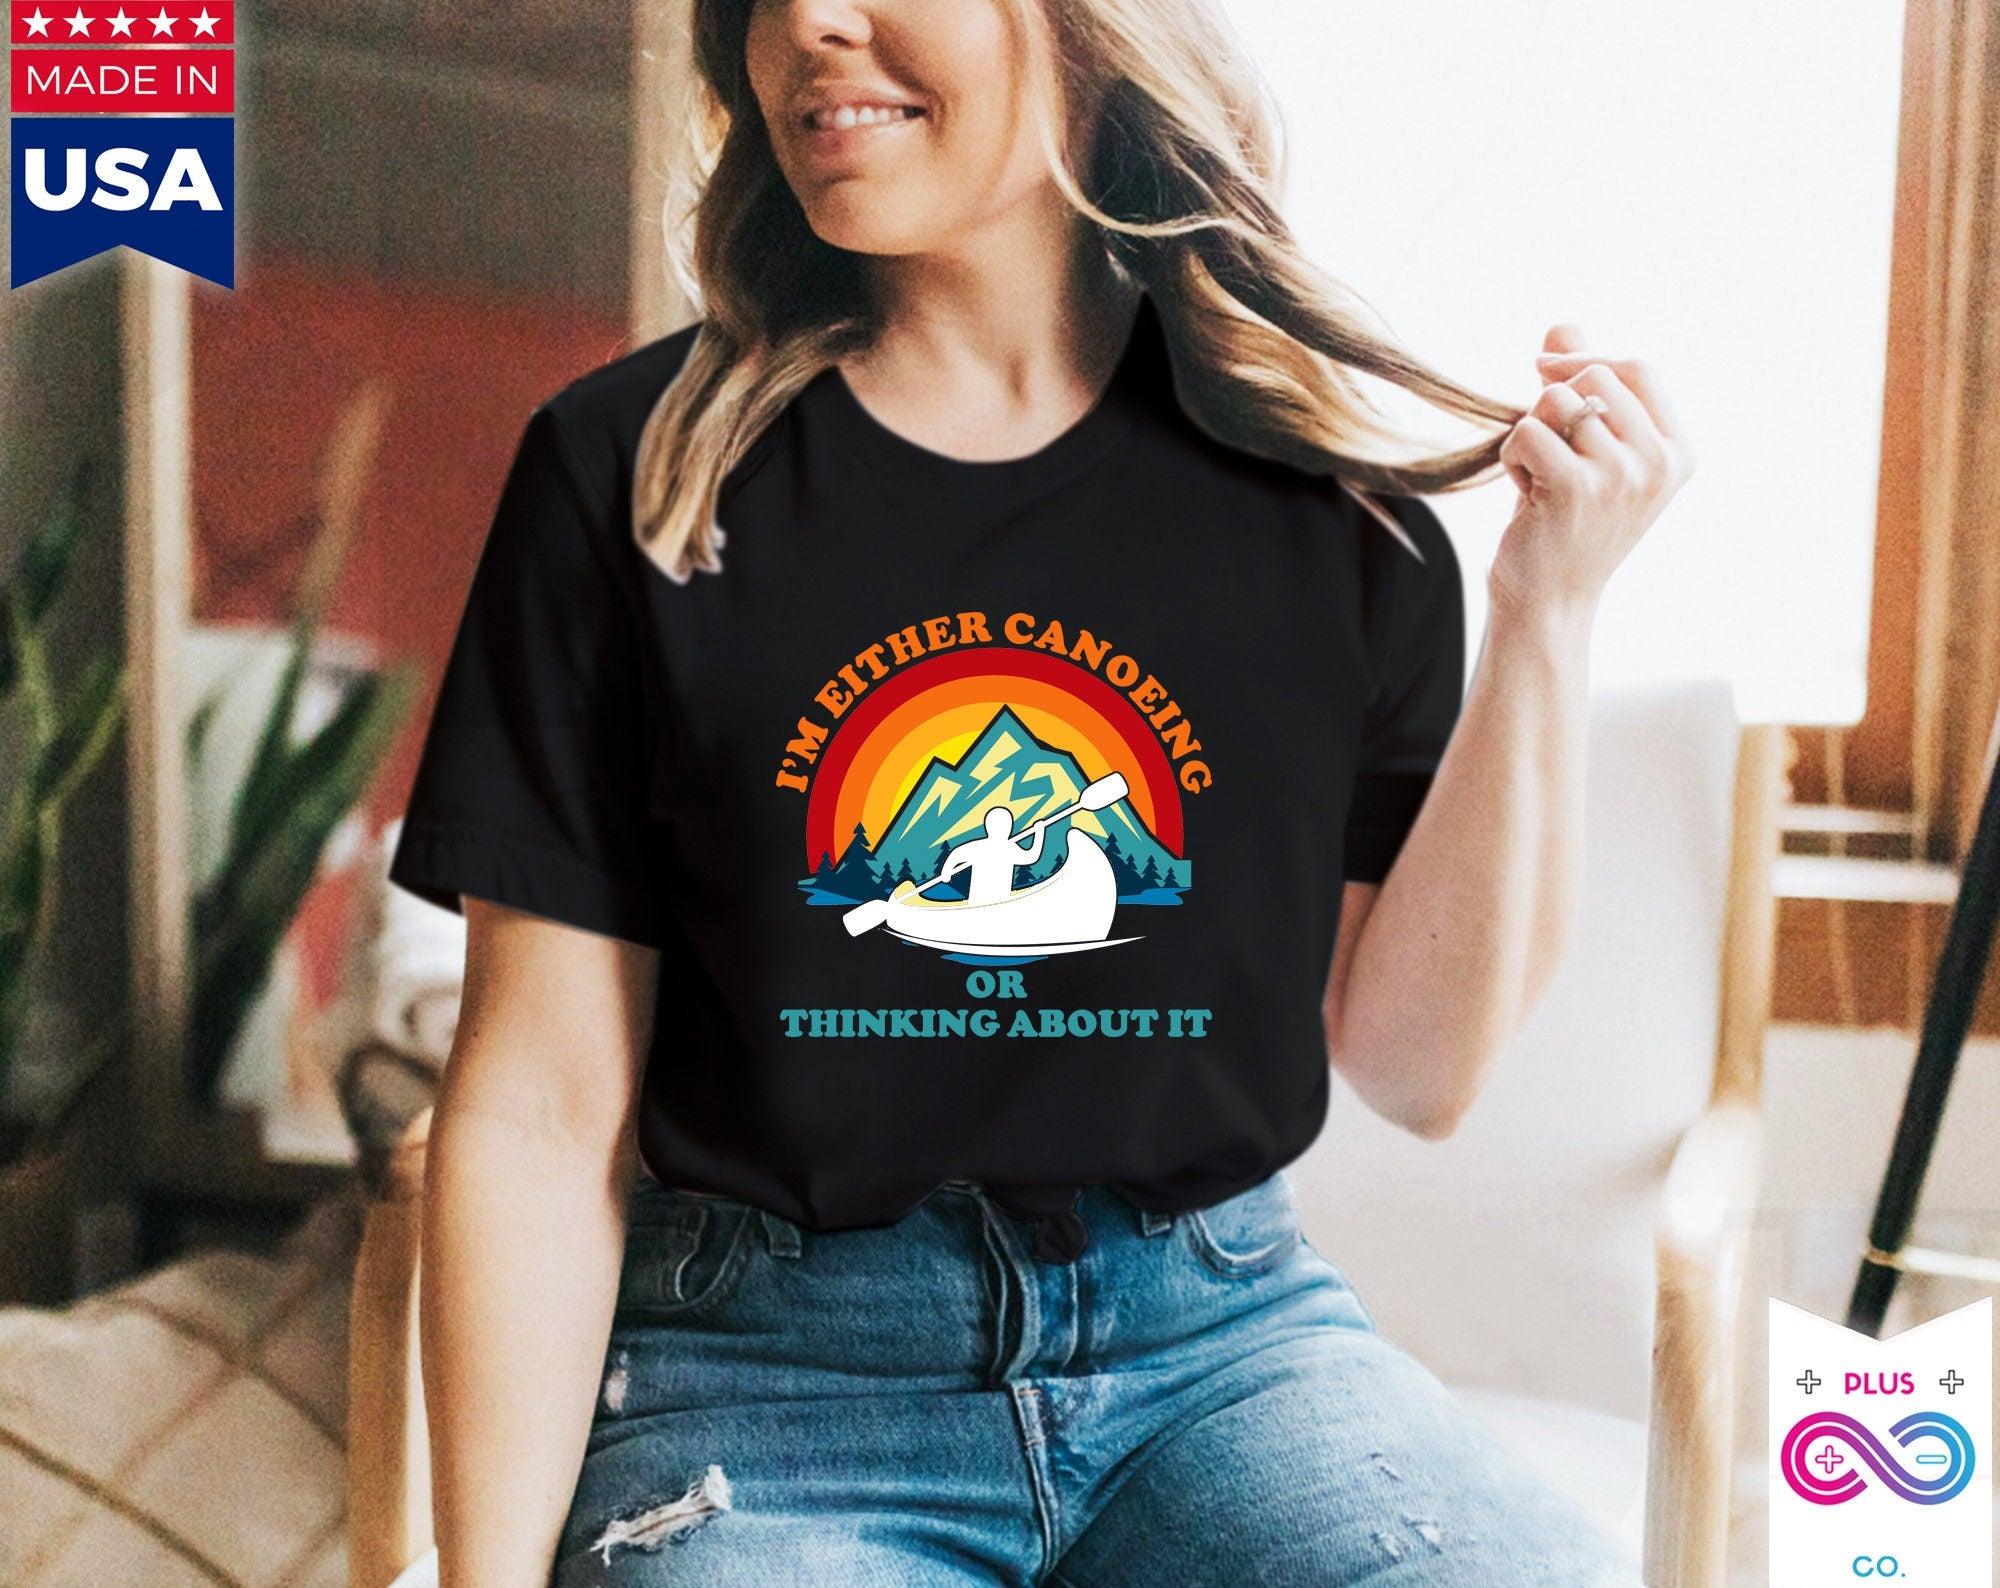 I'M Either Canoeing Or Thinking About It Retro Sunset,Retro Sunset Canoe Shirt  Kayak Shirt, Kayaking Gift, Canoe Shirt, Canoeing Gift - plusminusco.com